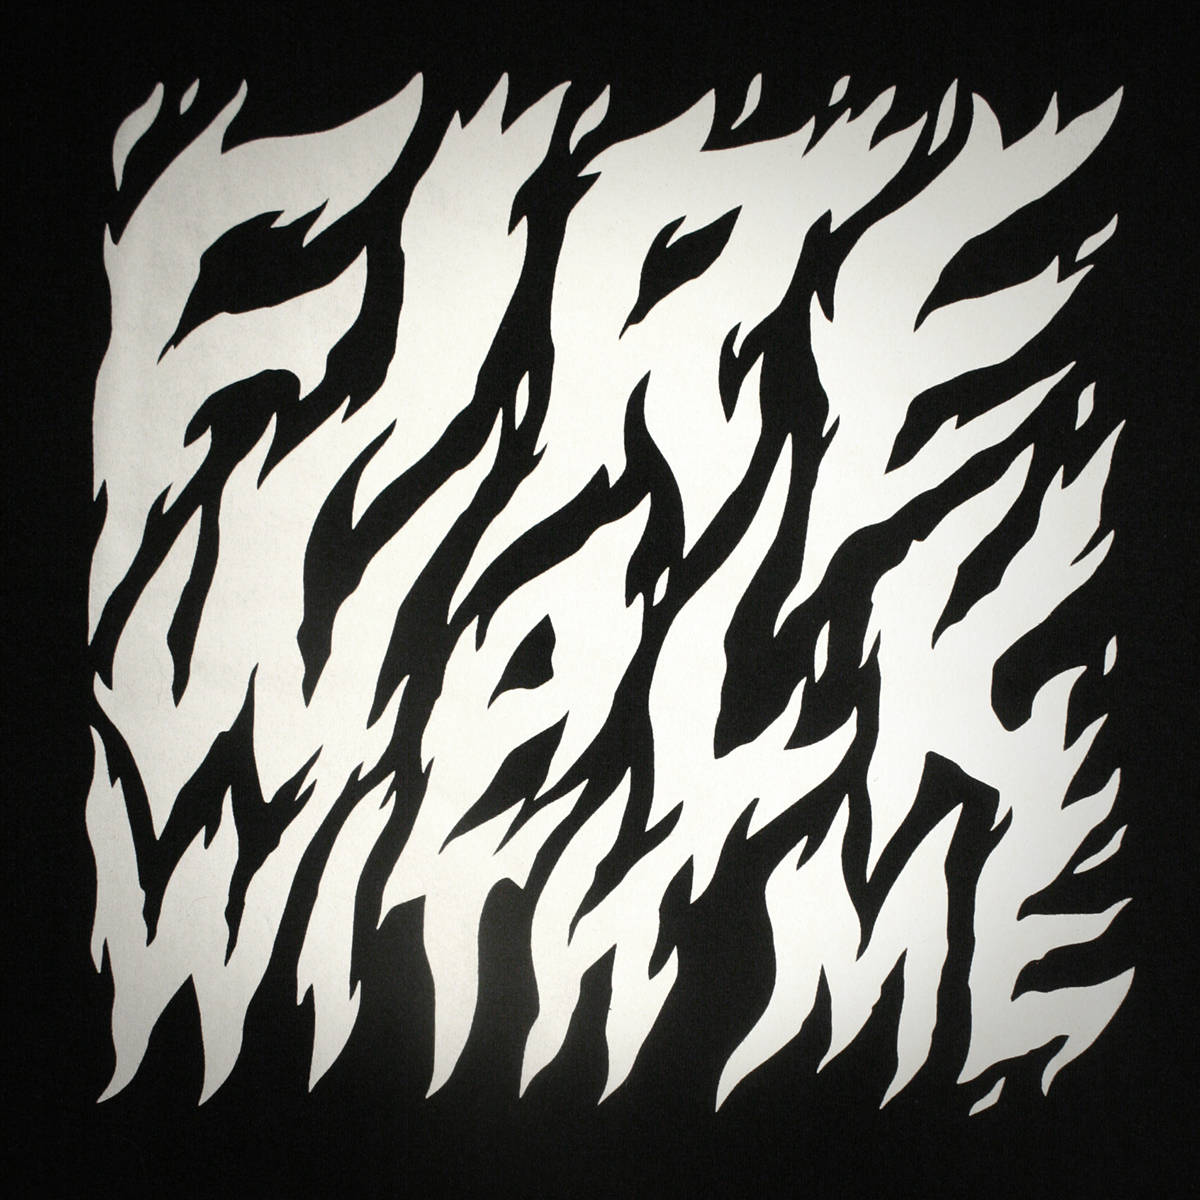 Fire walk with me with - T-shirt female fitted